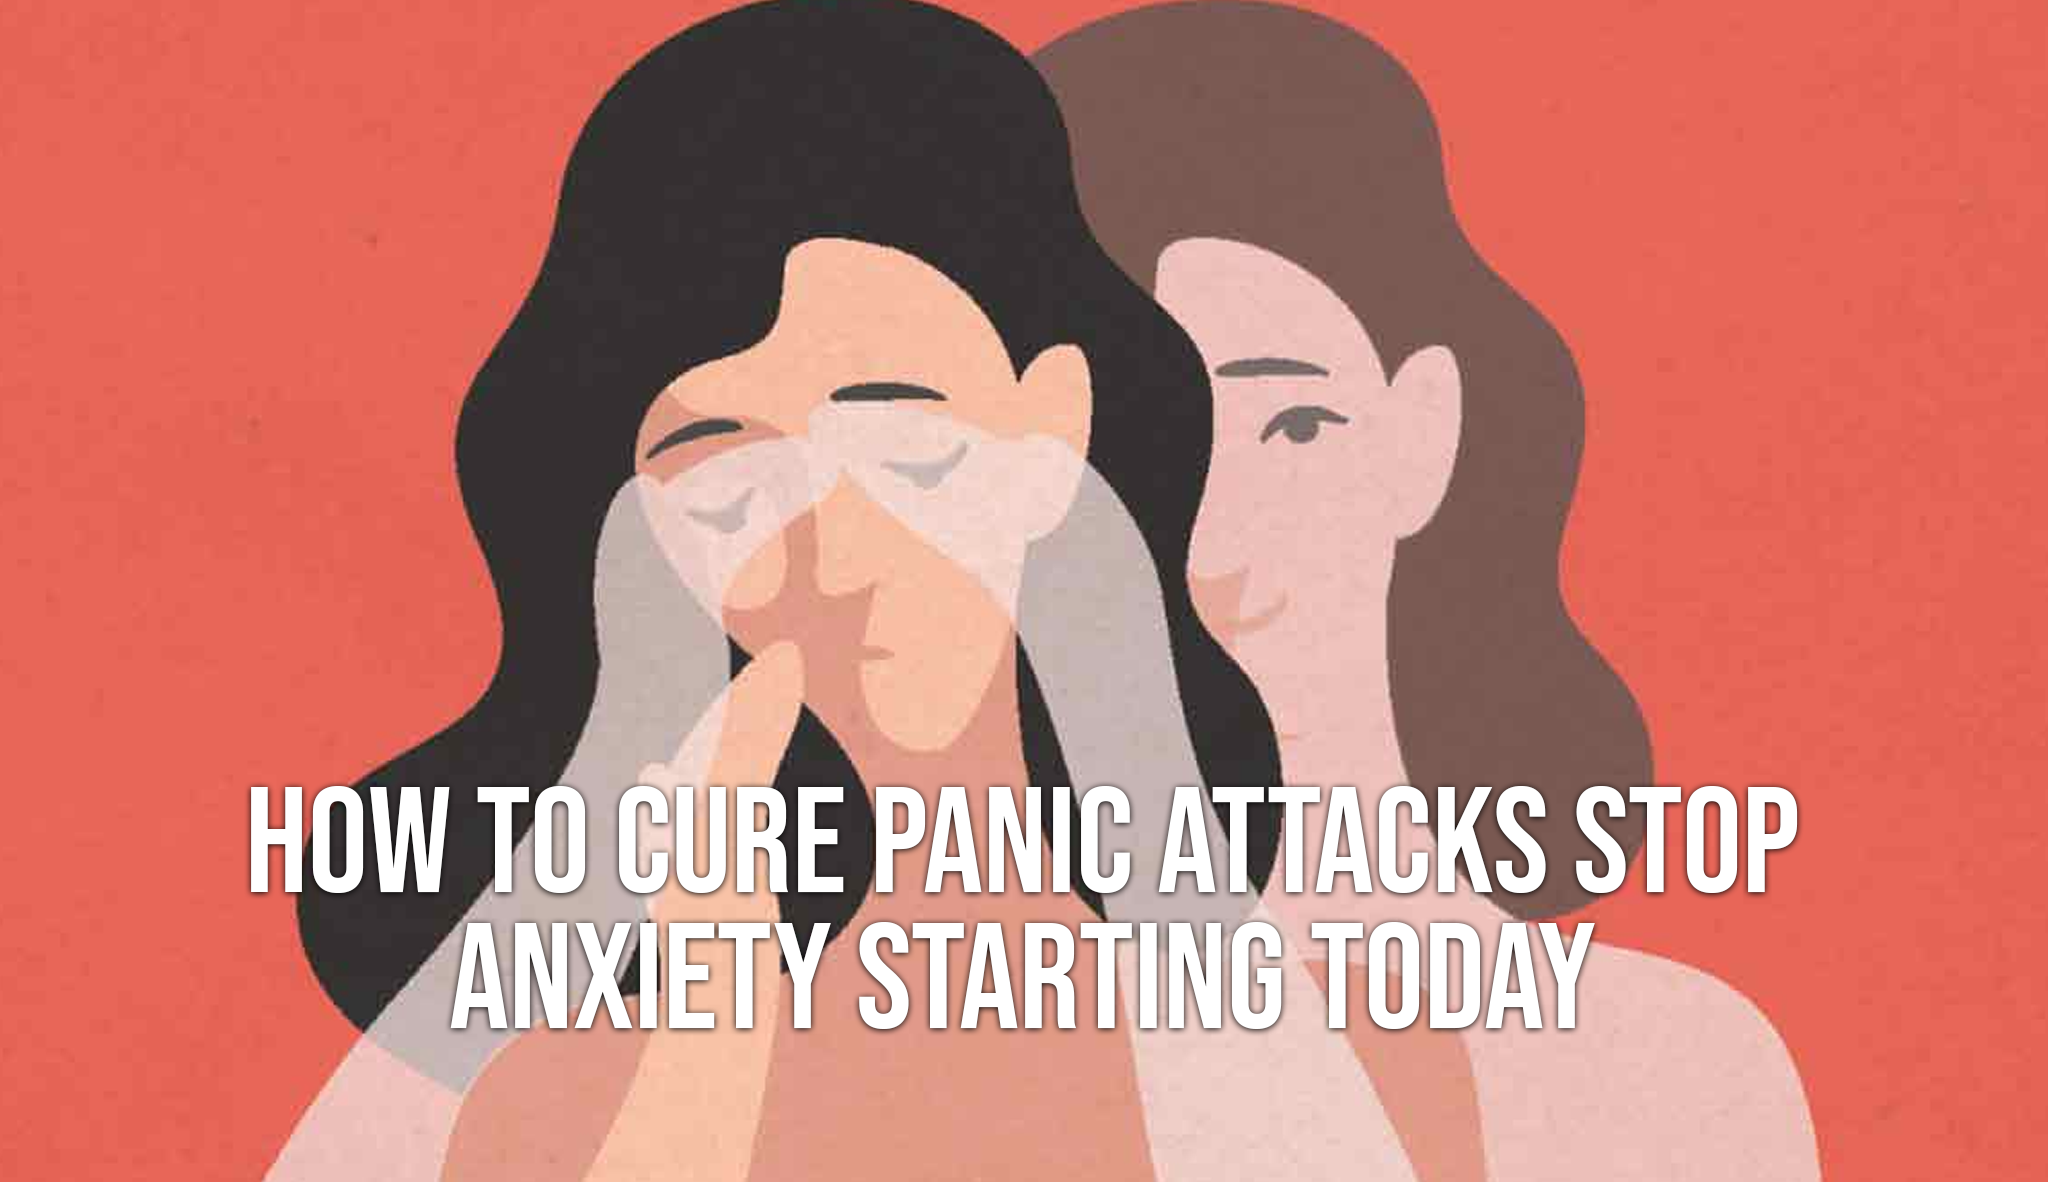 How To Cure Panic Attacks - Stop Anxiety Starting Today